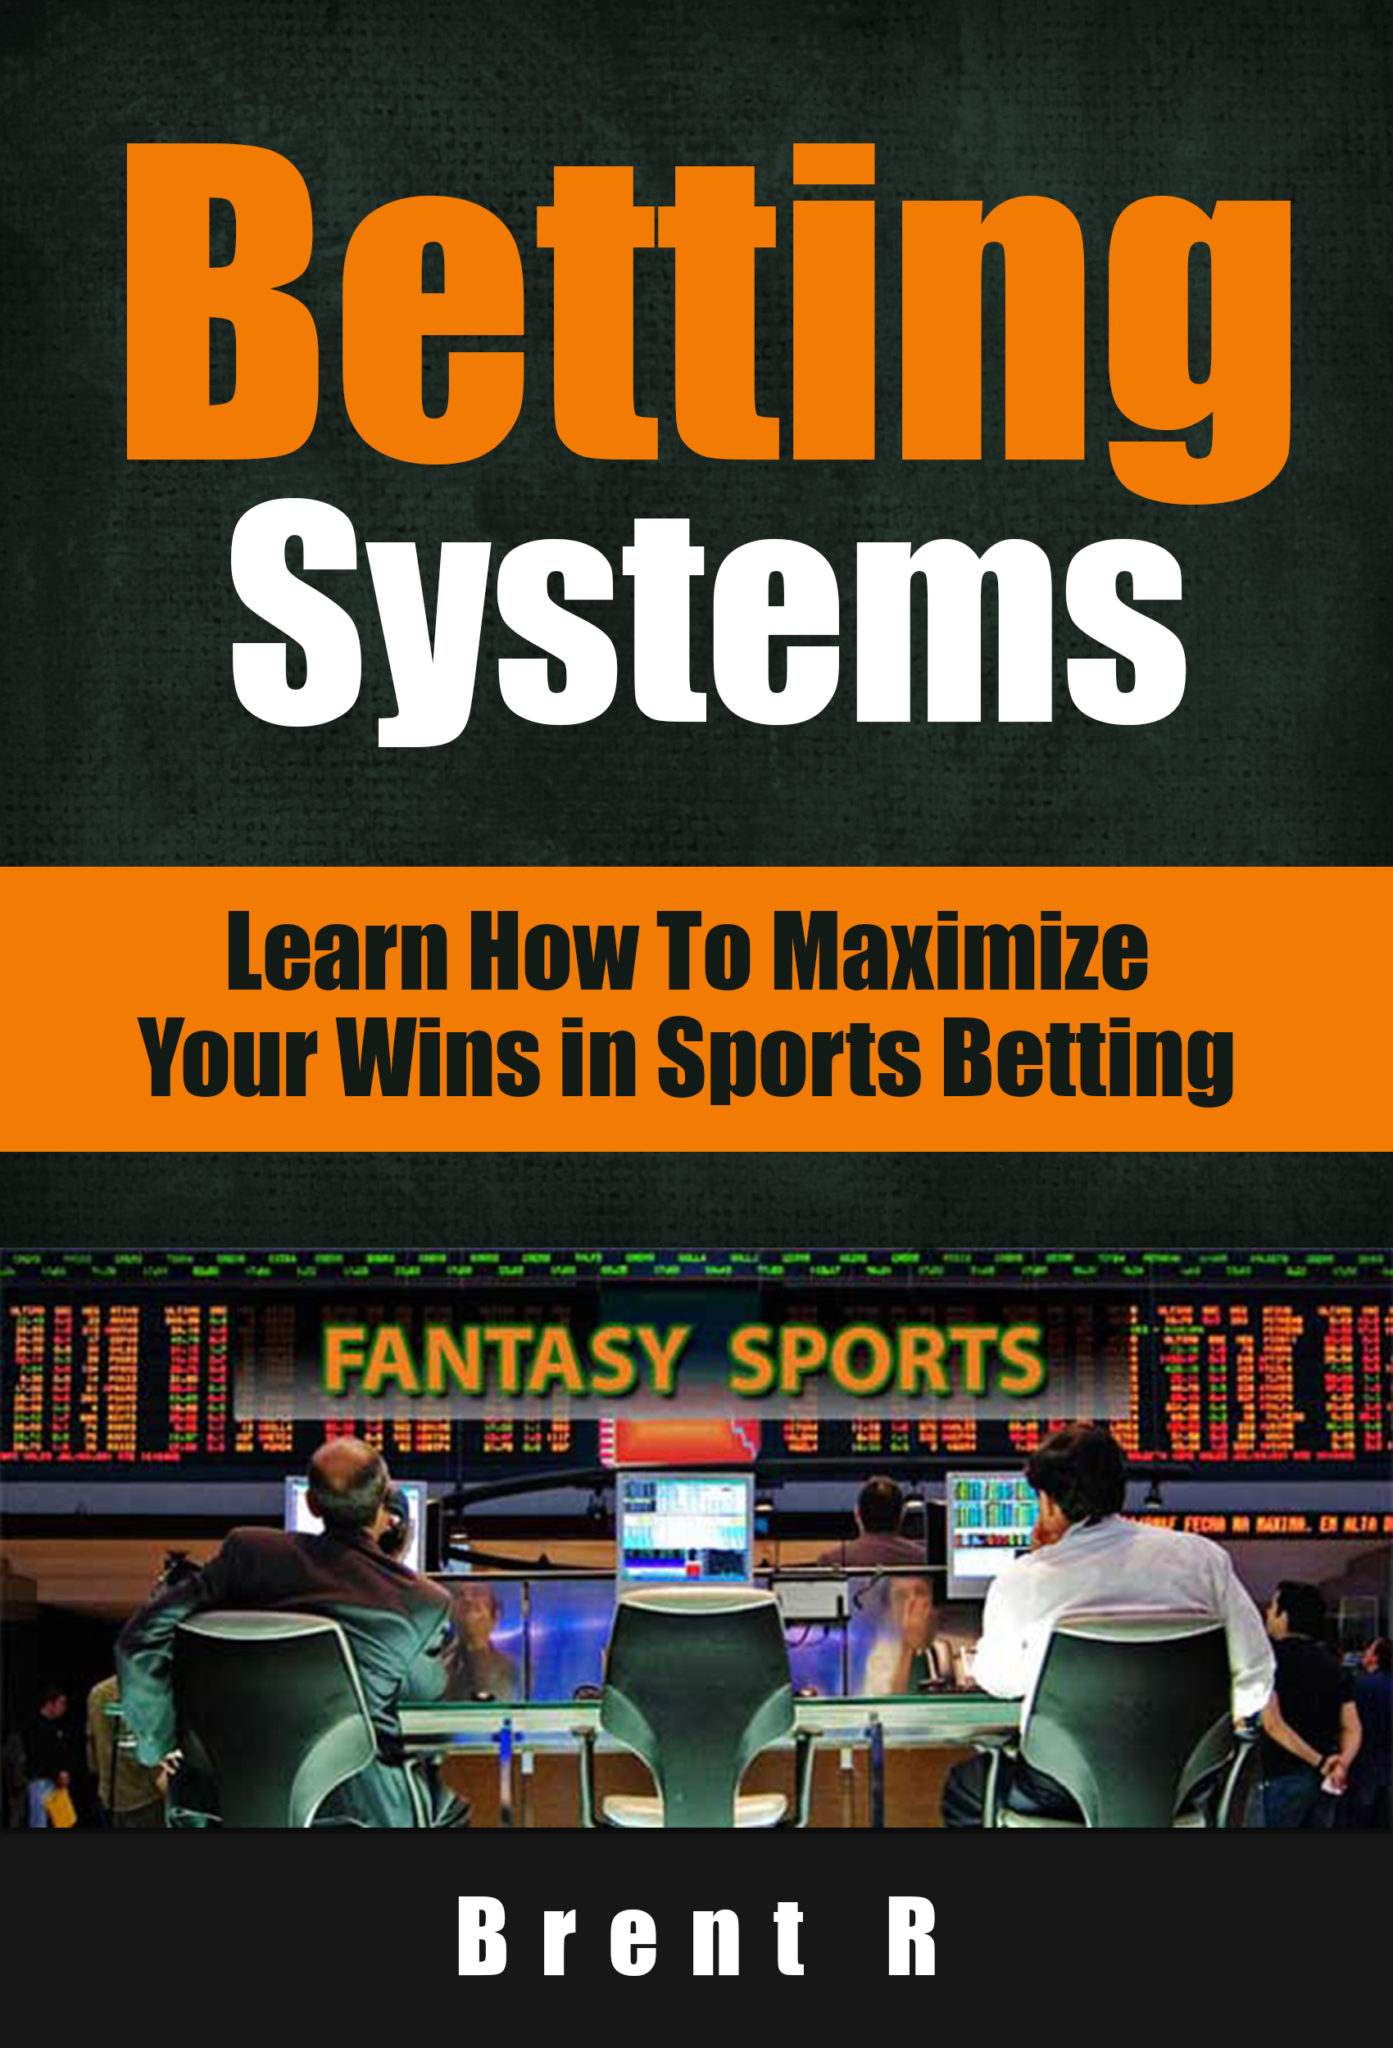 FREE: Betting Systems: Learn How to Maximize your Wins in Sports Betting by Brent R